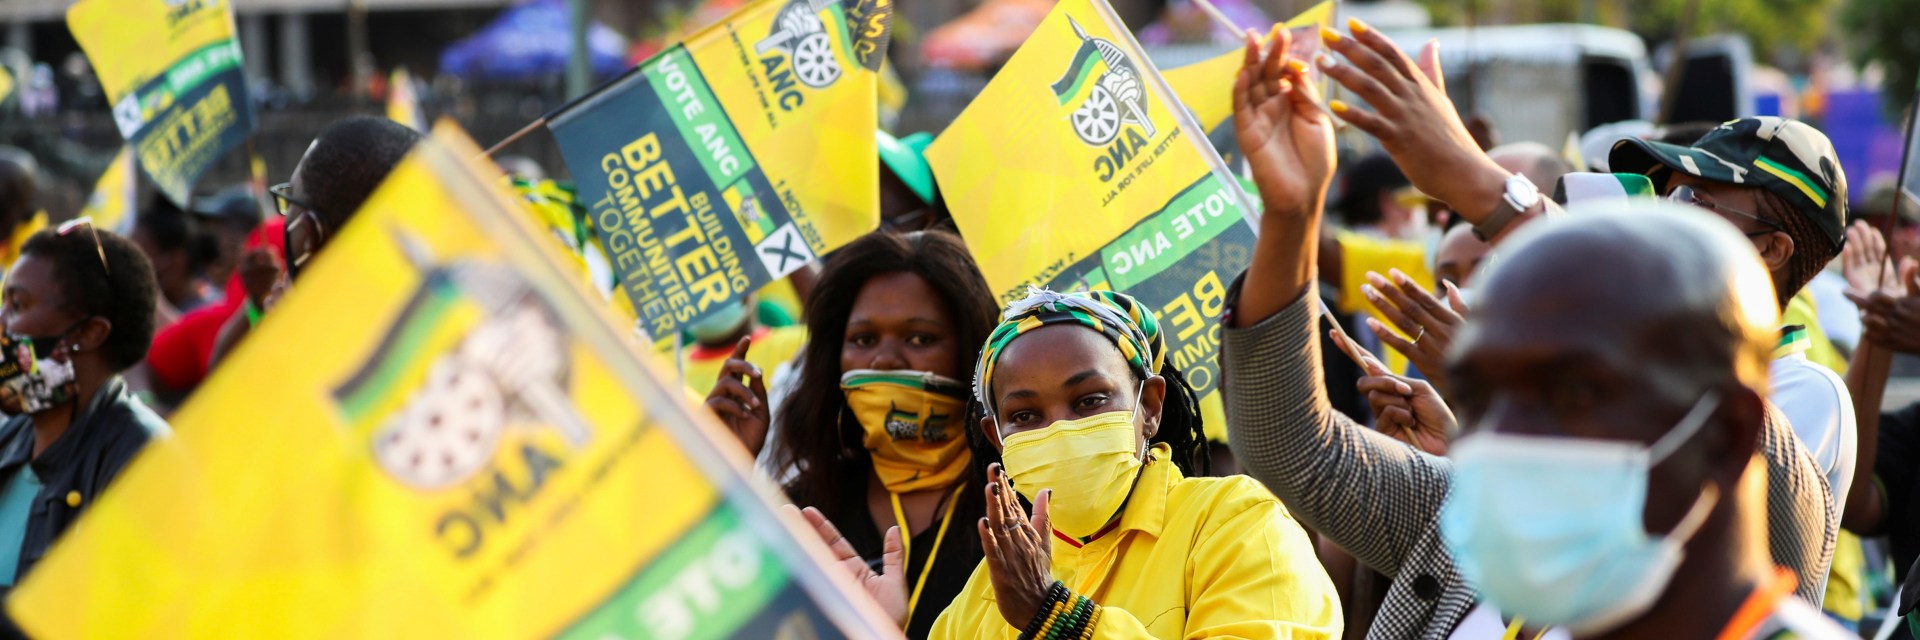 Explained: The Regularity Of Municipal Elections In South Africa